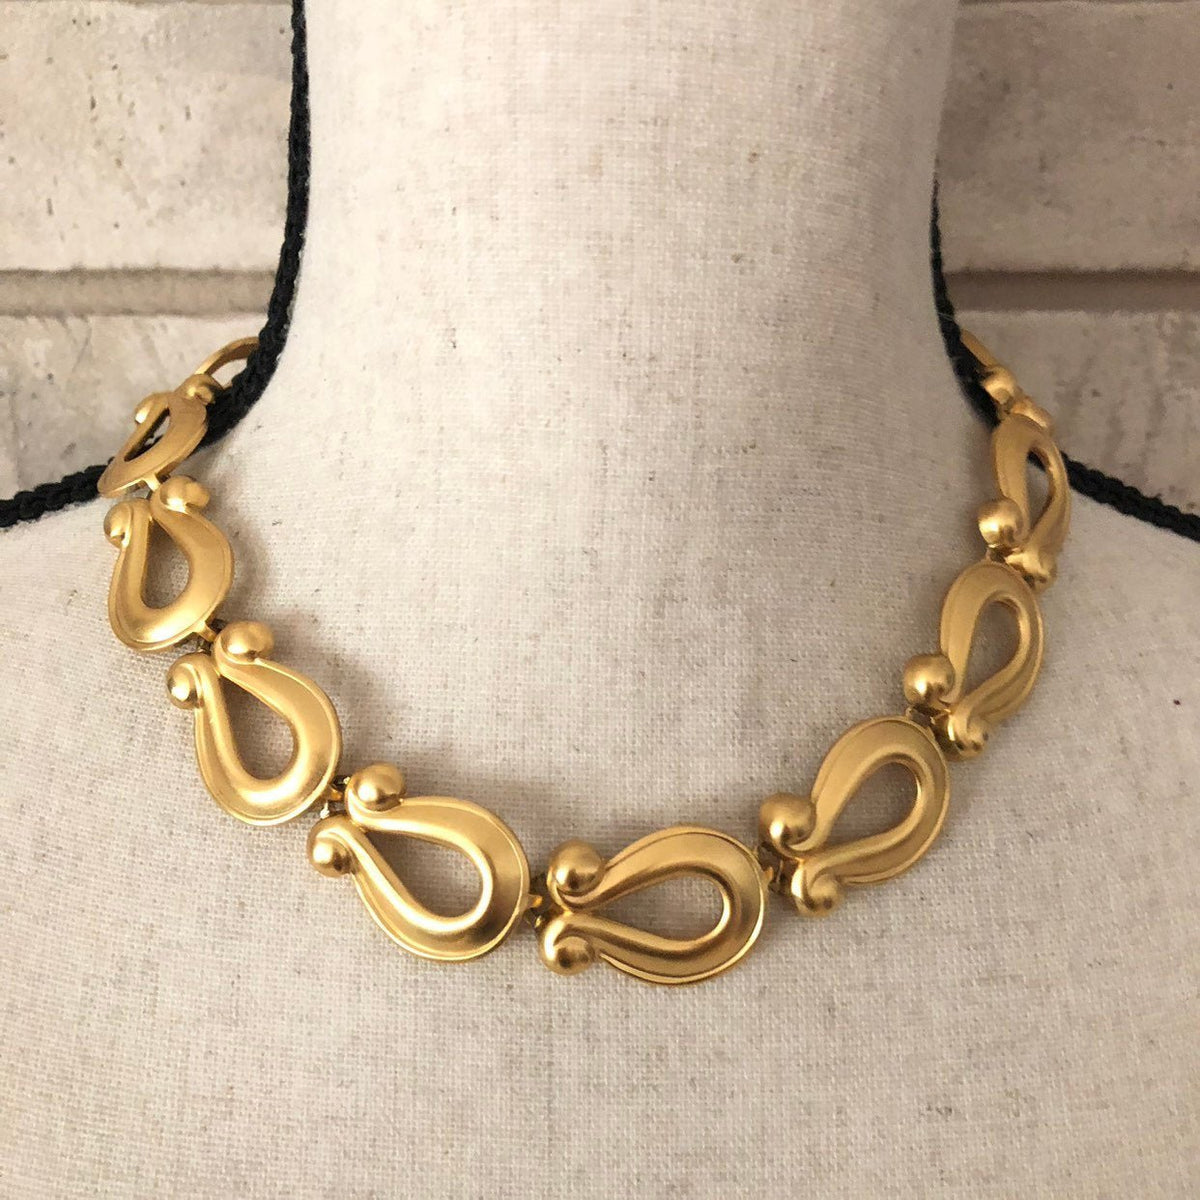 Anne Klein Classic Matt Gold Horse Shoe Link Necklace - 24 Wishes Vintage Jewelry